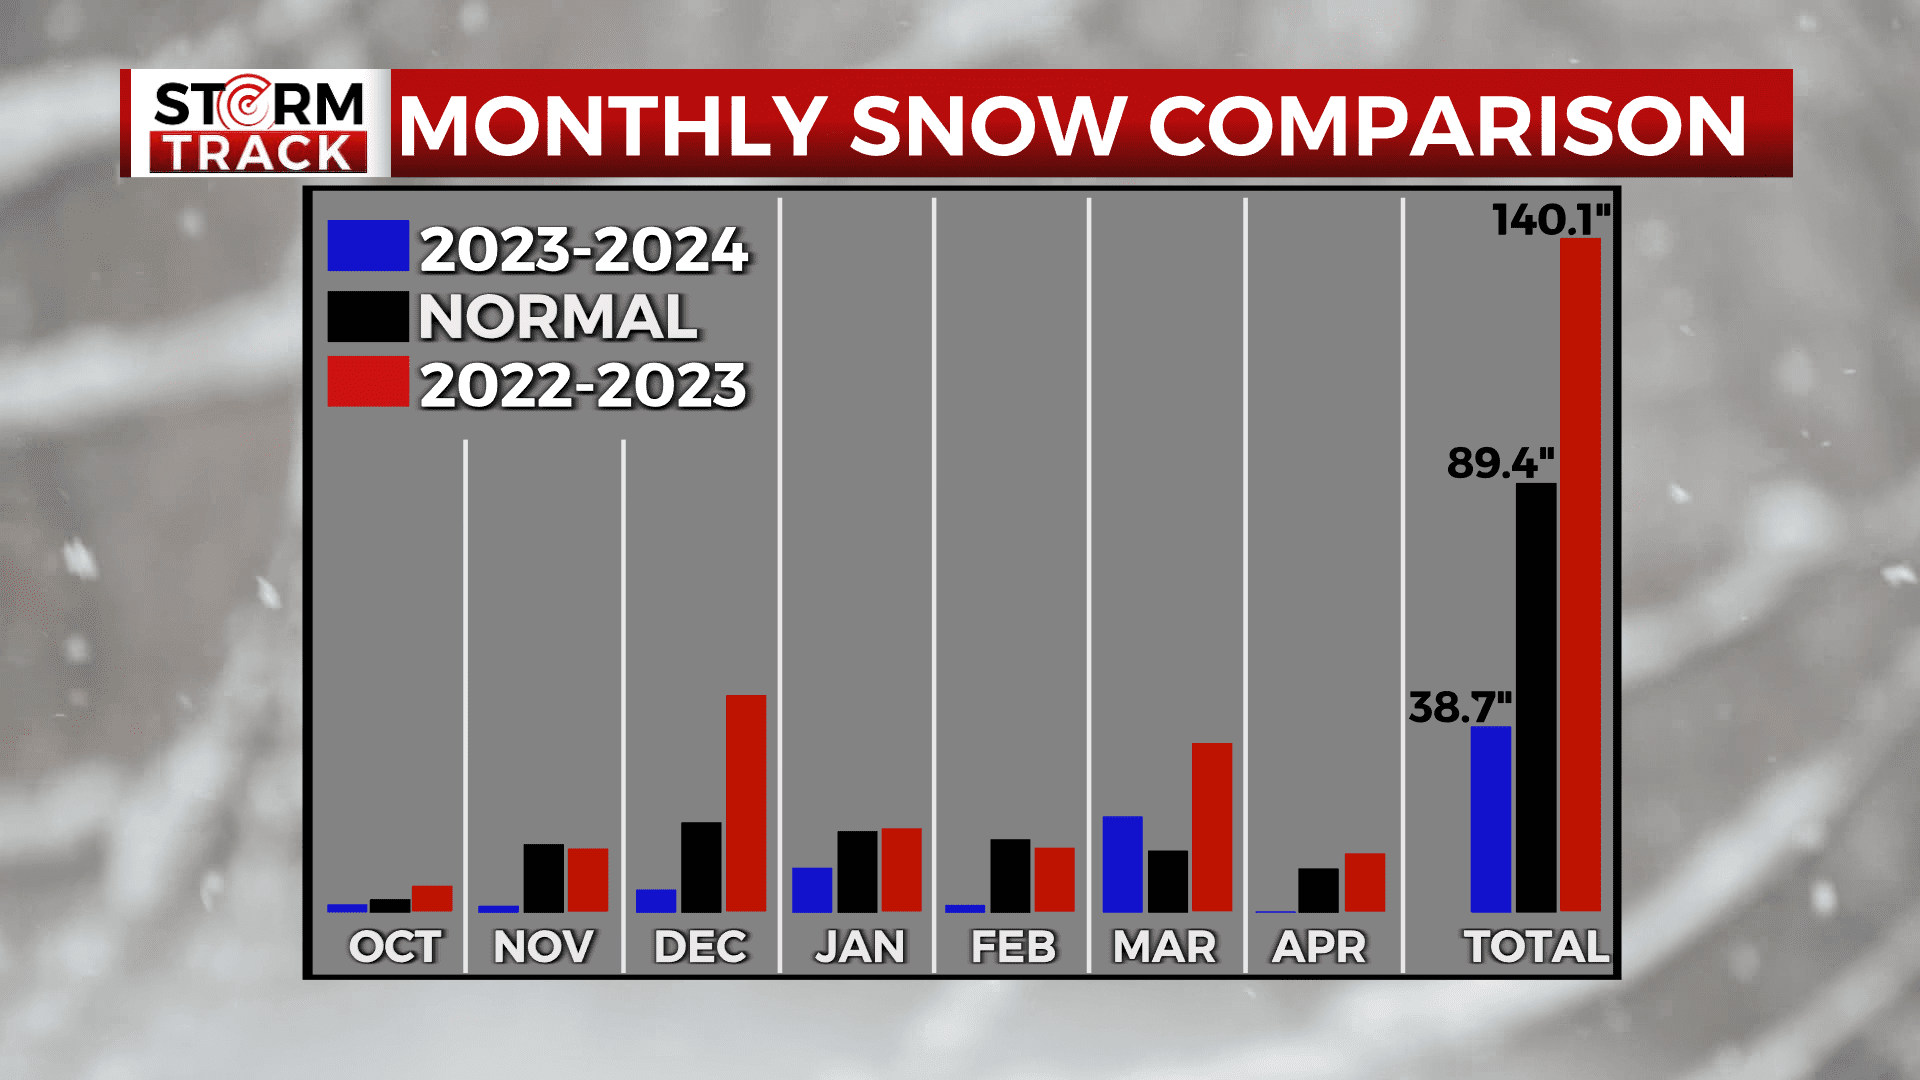 Graphic comparing monthly snowfall for 2022-2023, 2023-2024, and normal